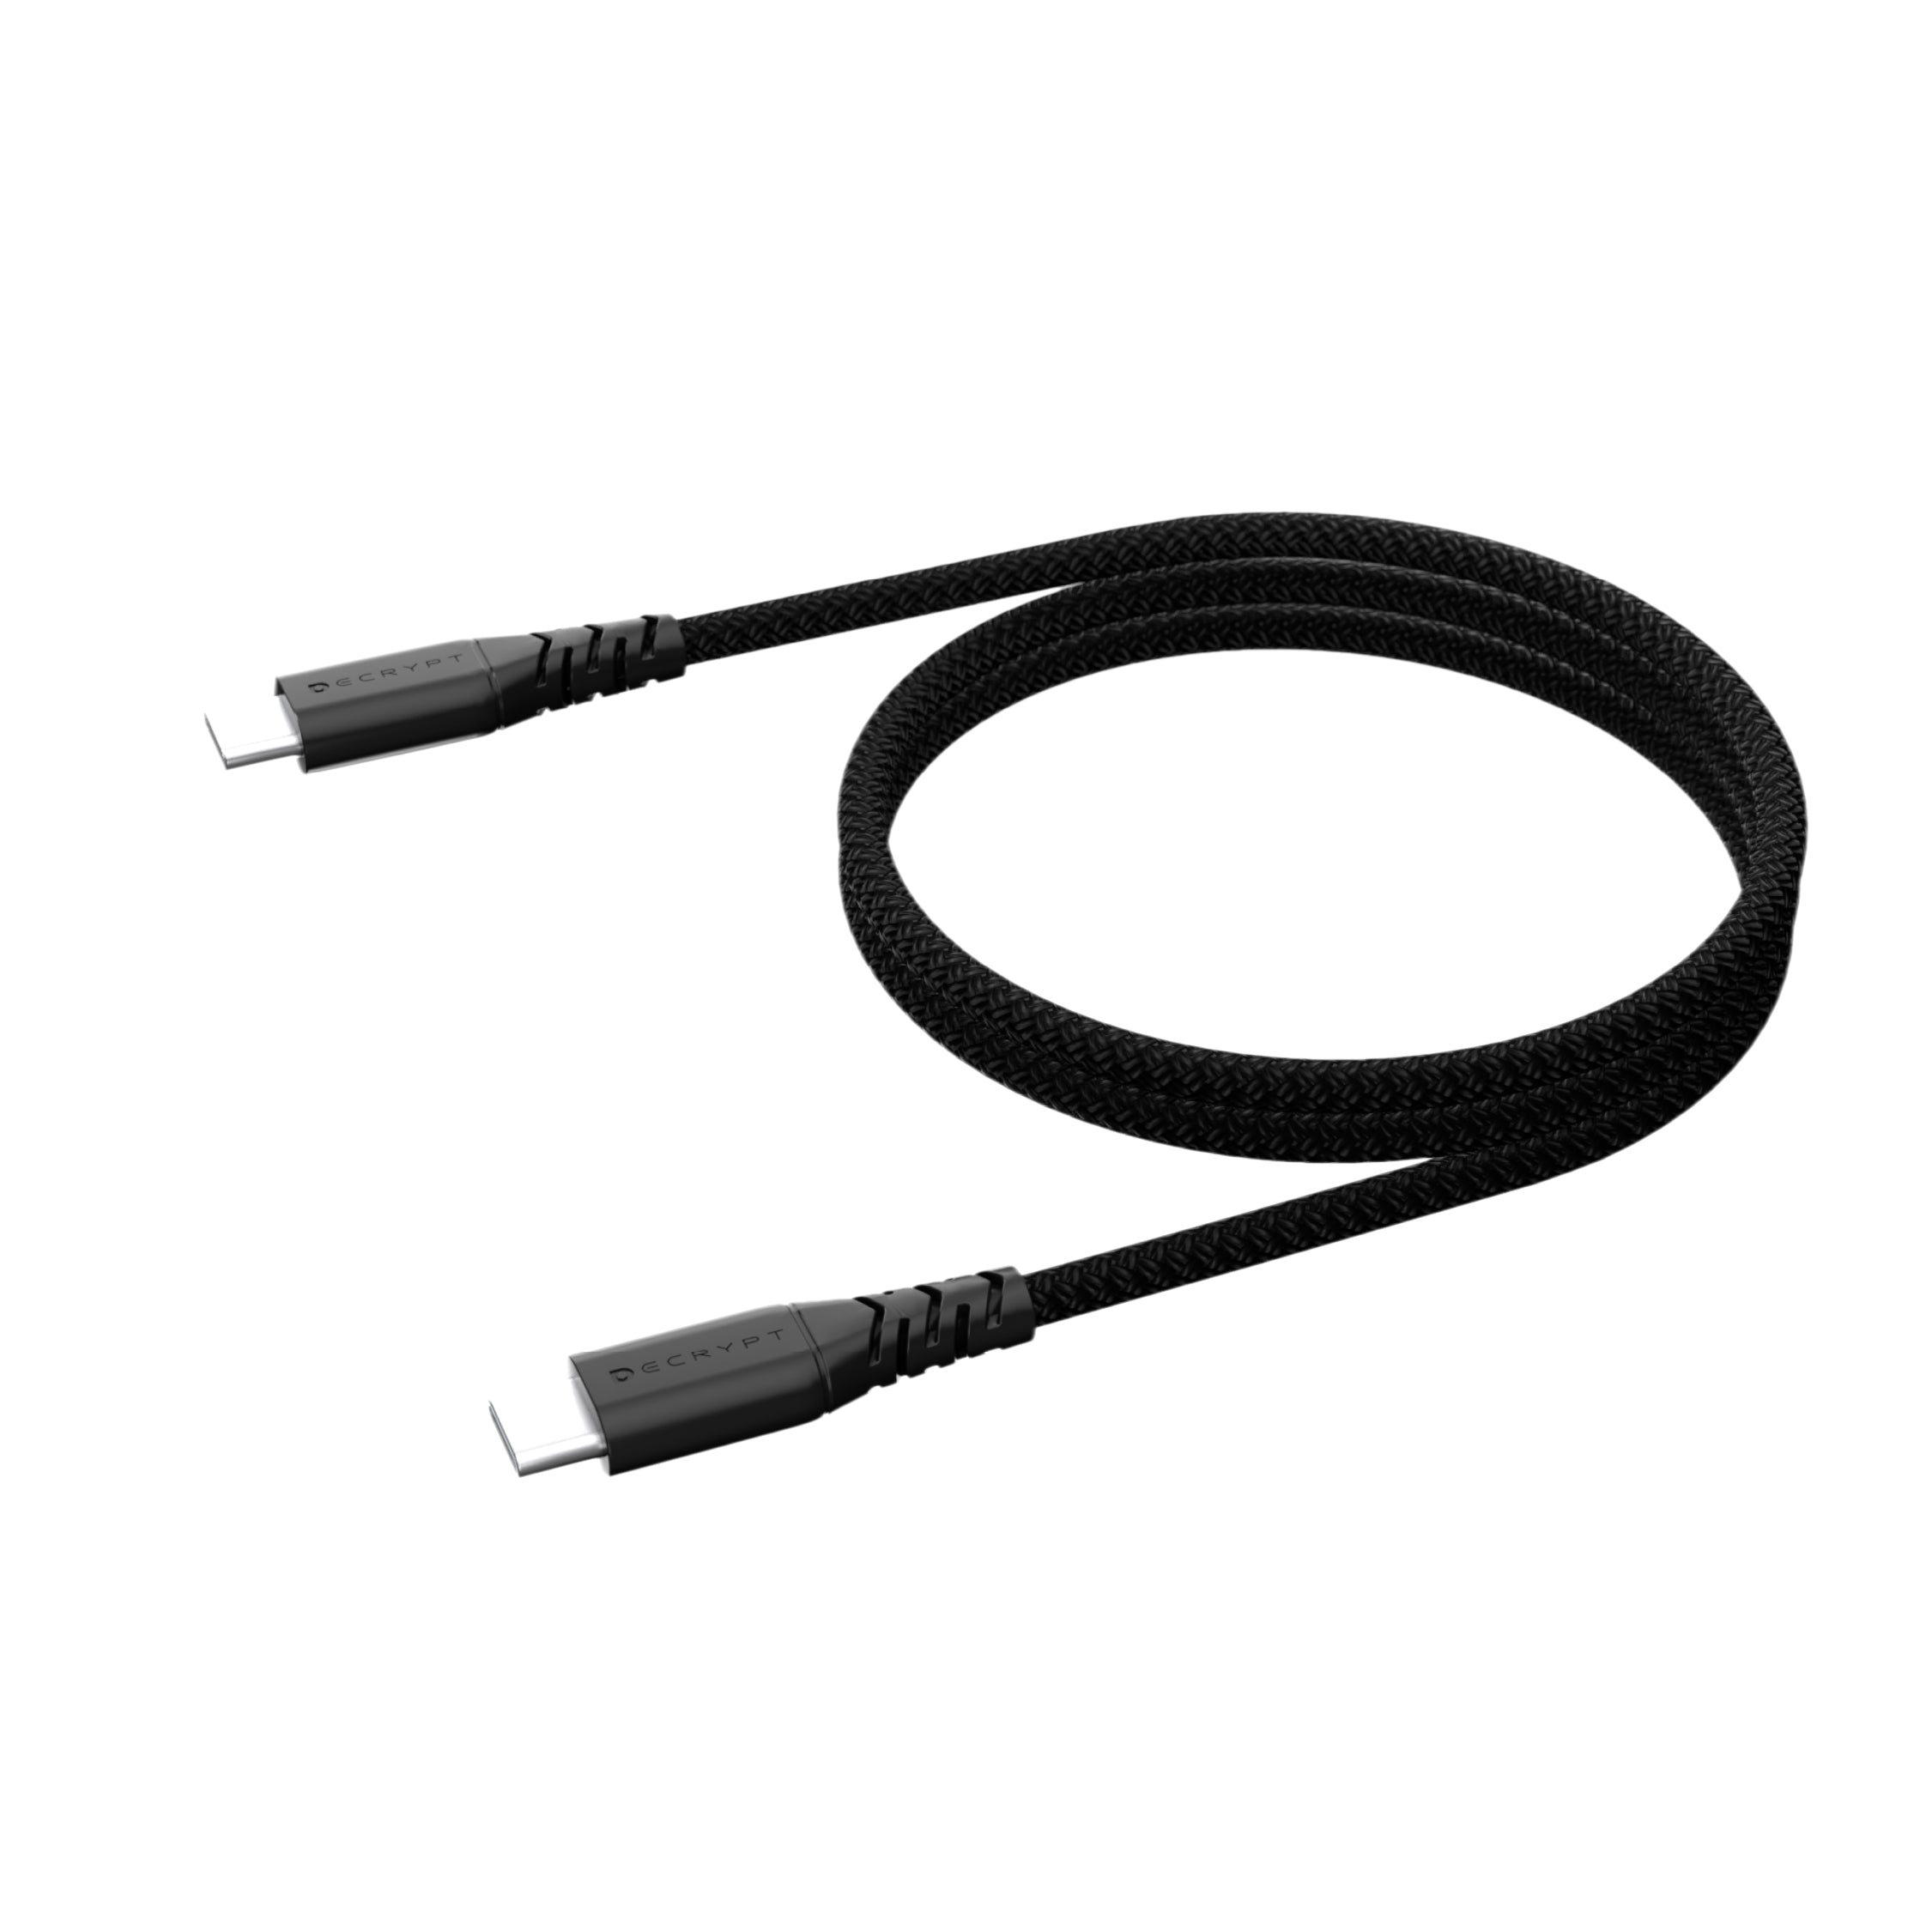 USB-C to USB-C Braided Cable - 1 Meter